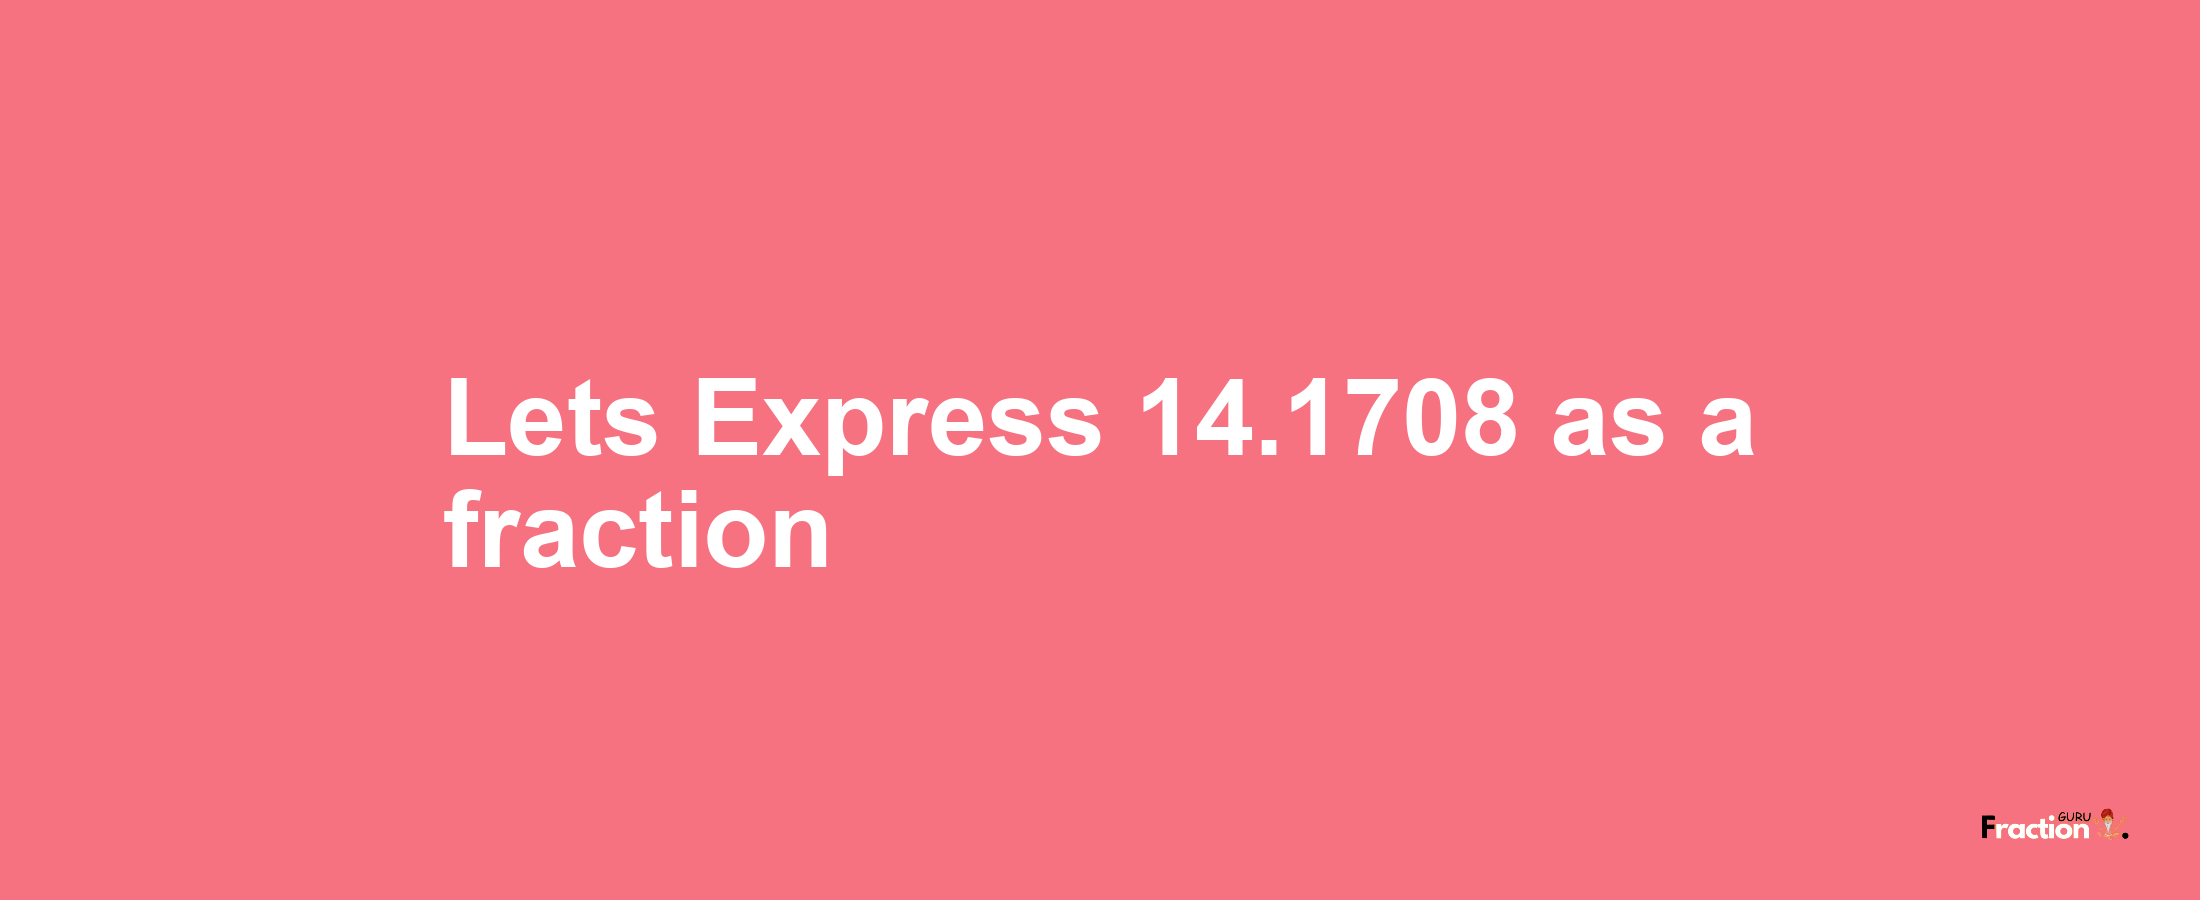 Lets Express 14.1708 as afraction